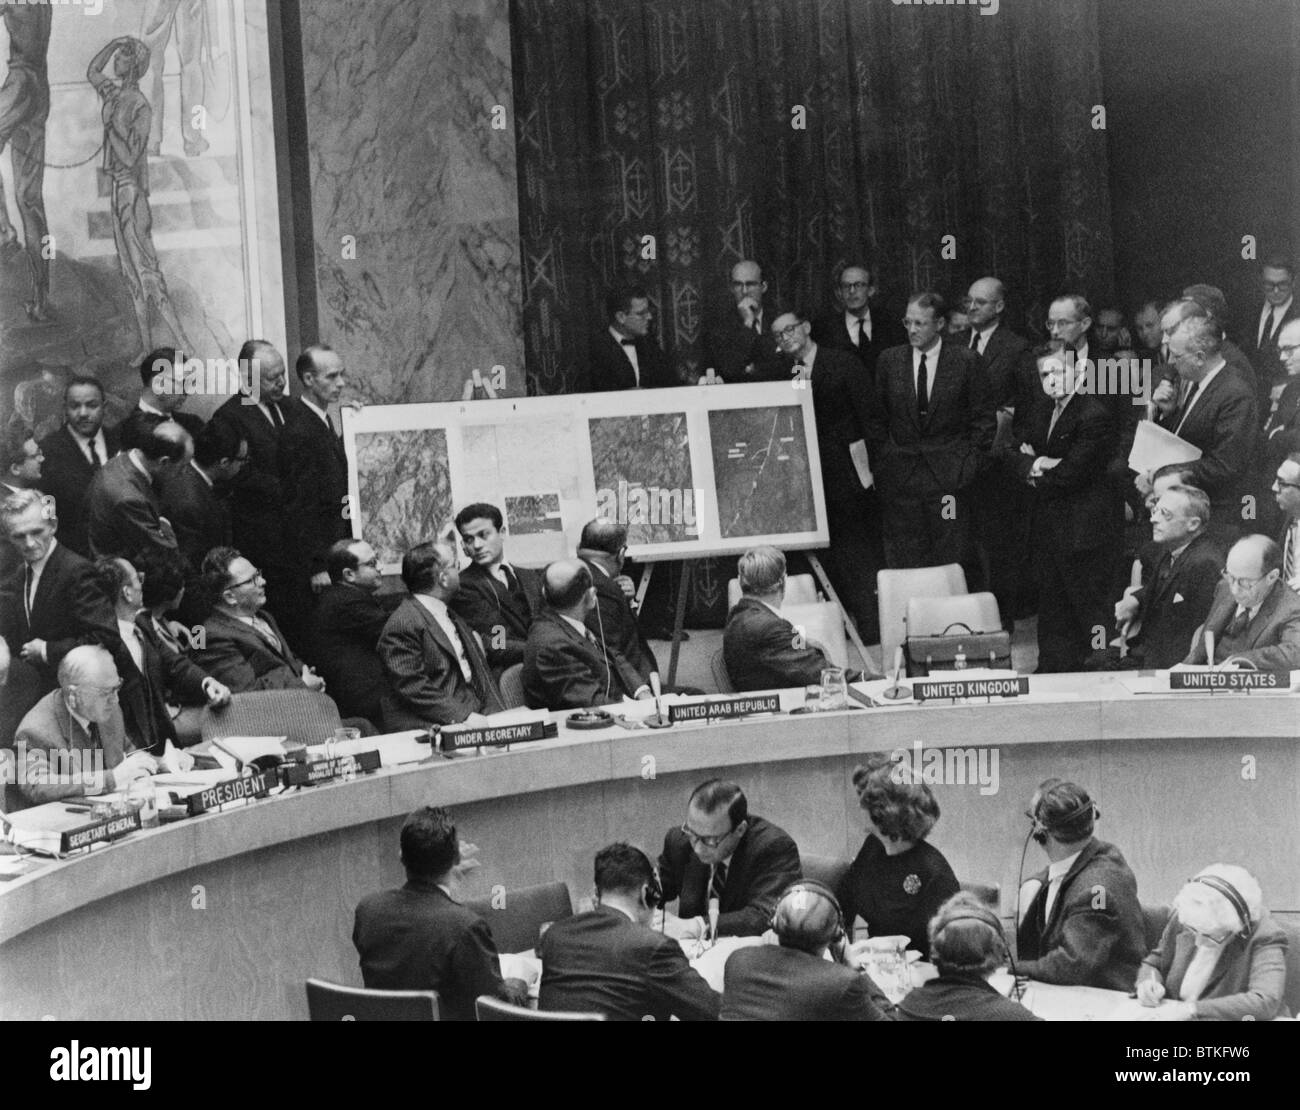 Adlai Stevenson describes location of missile sites in Cuba using aerial photographs during a United Nations Security Council meeting in New York. October 25, 1962. Stock Photo